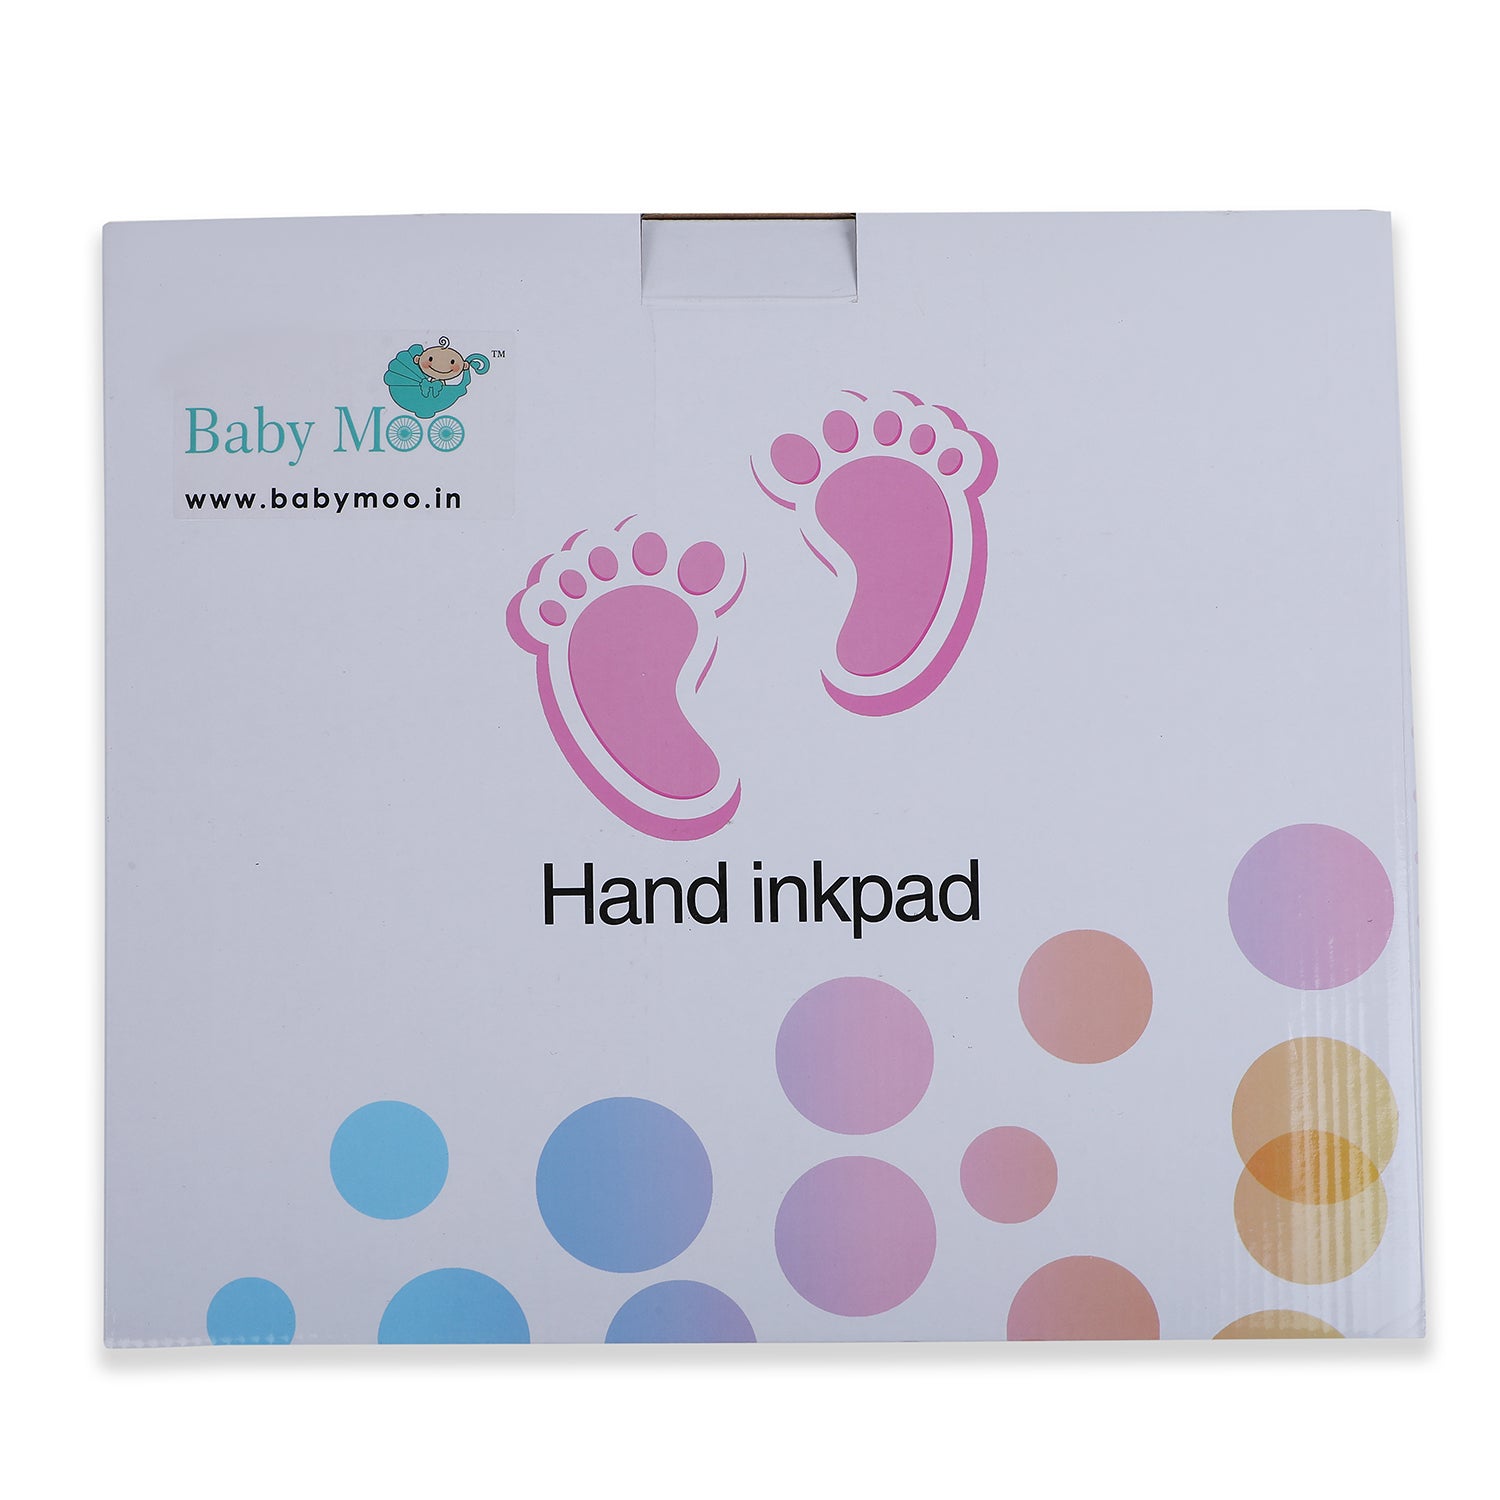 Baby Moo Clay Handprint And Footprint Impression Wooden Photo Frame For Infant Memories - White - Baby Moo